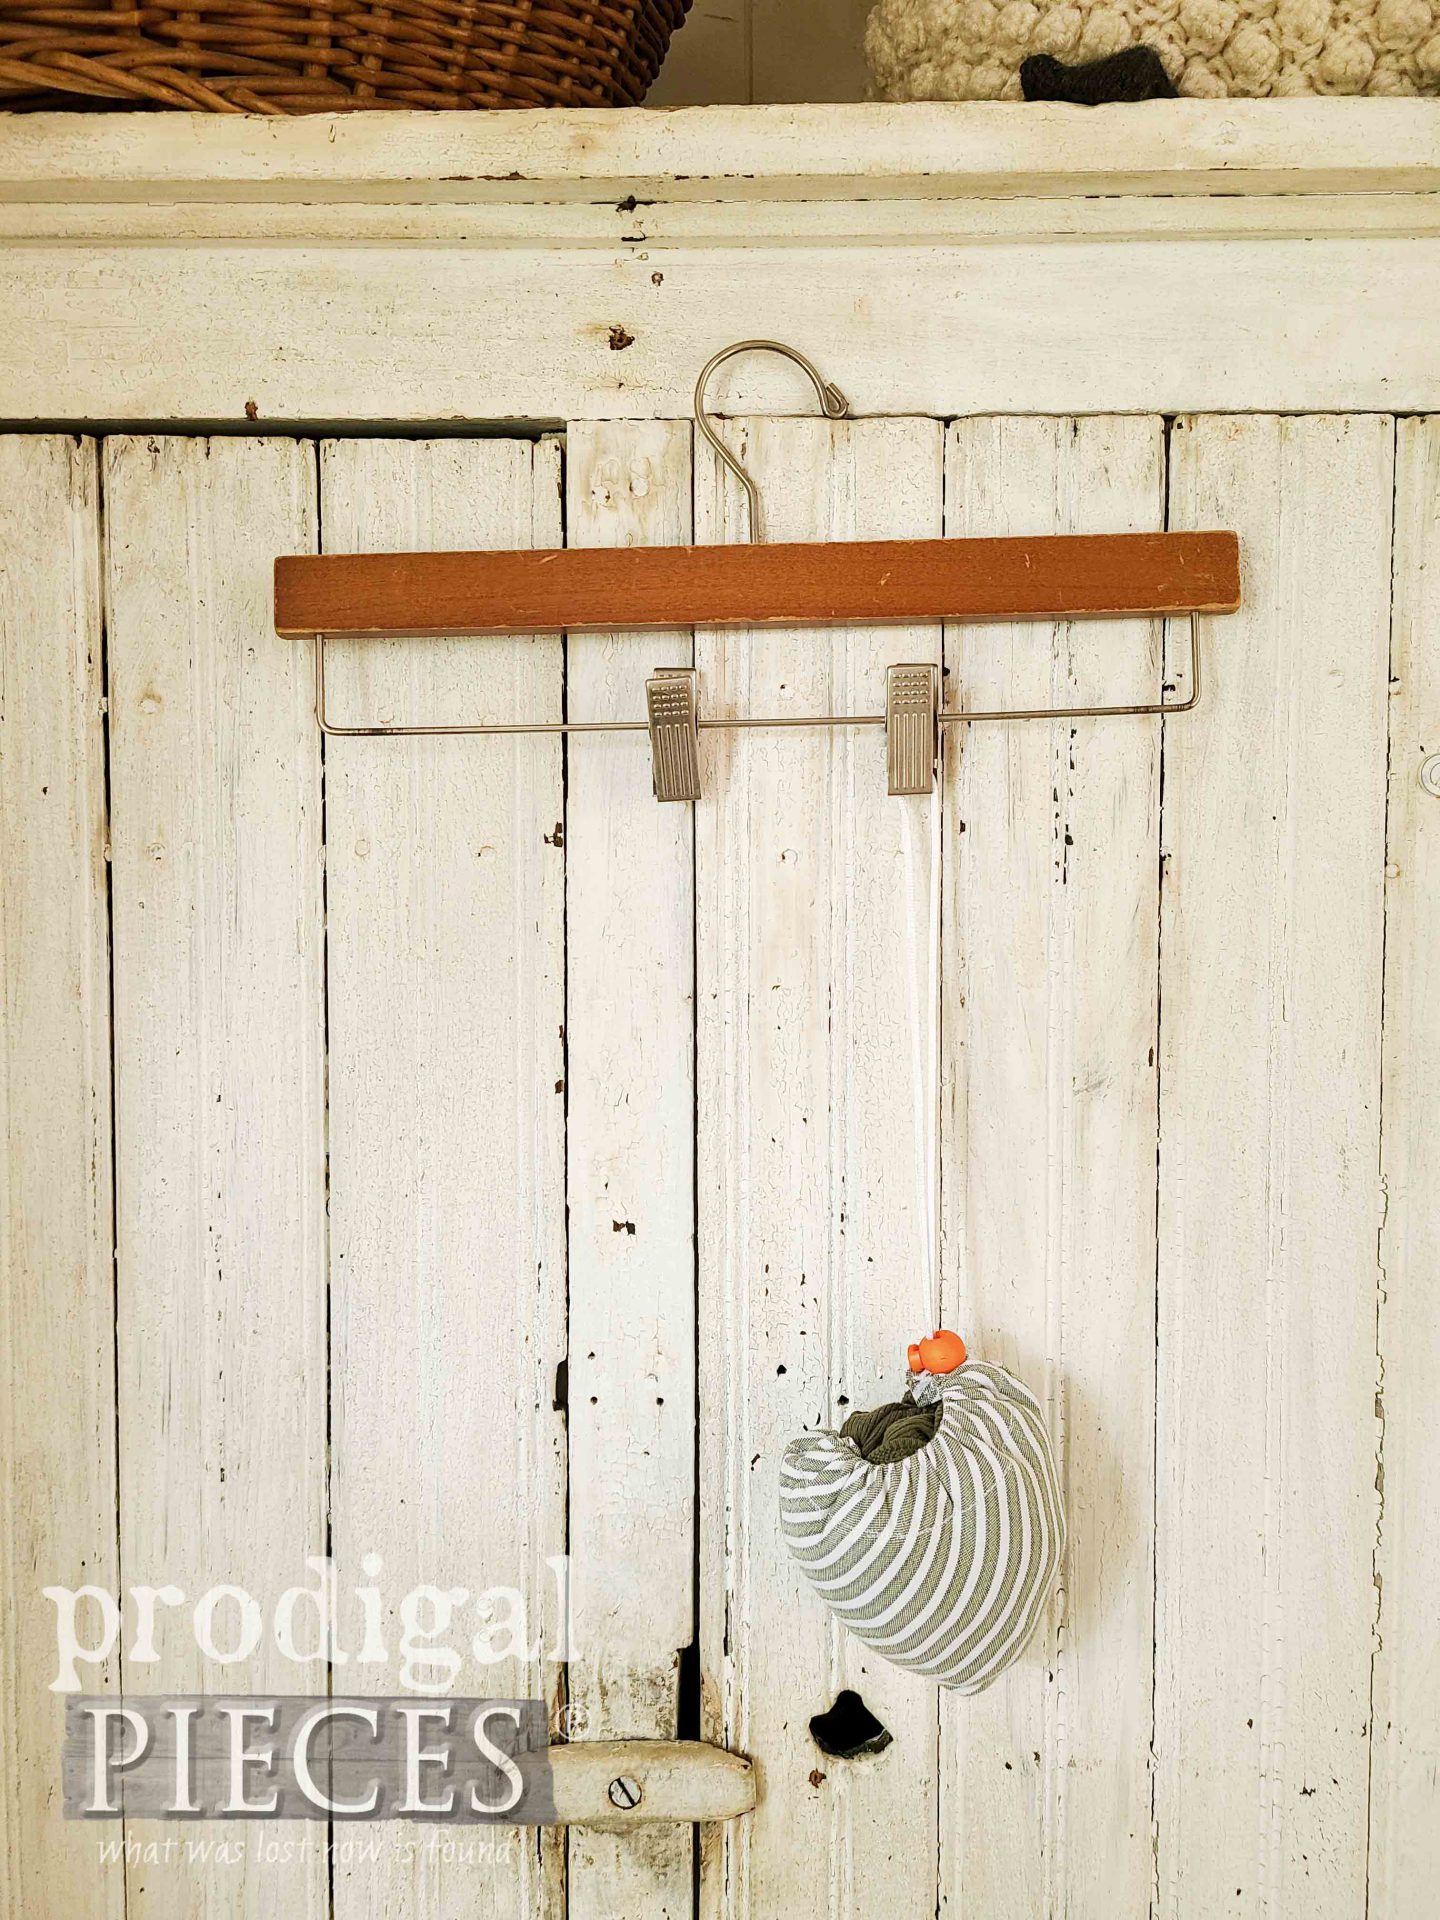 Hanging Refashioned Tank Top Reusable Bag with Tutorial by Larissa of Prodigal Pieces | prodigalpieces.com #prodigalpieces #sewing #crafts #home #shopping #diy